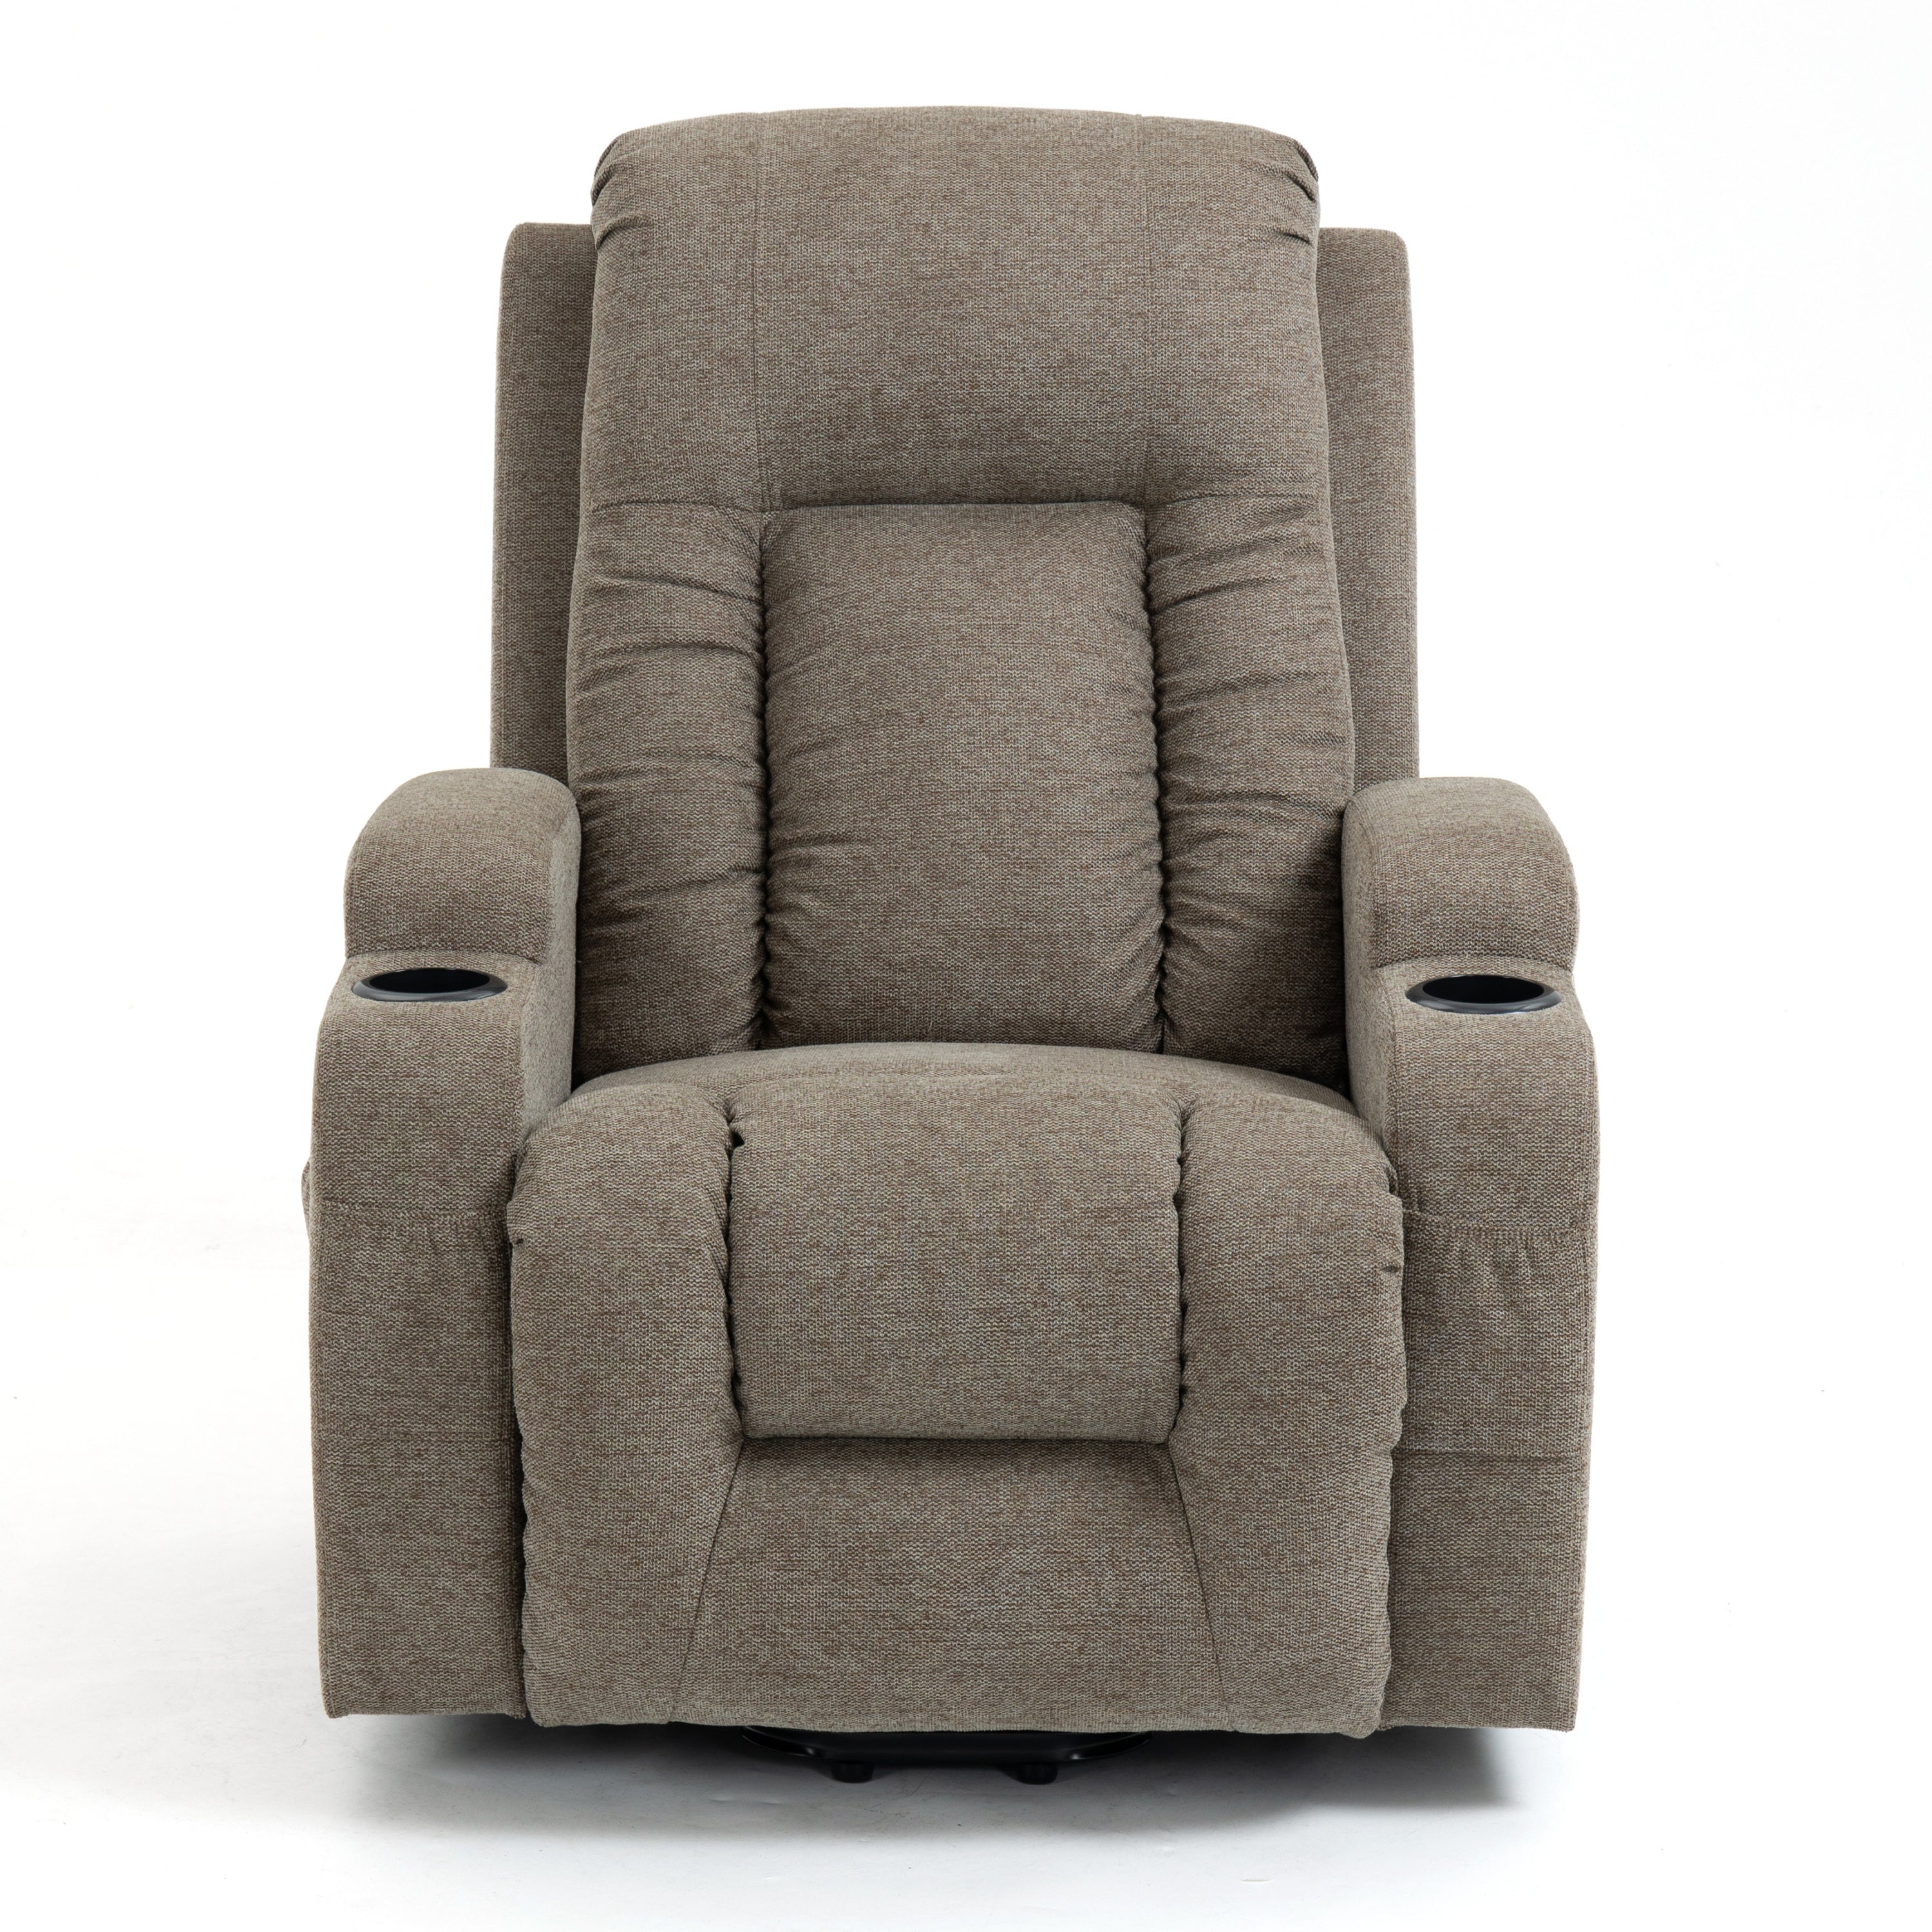 Infinite Position Heavy Duty Power Lift Recliner with Massage and Heat, seated front view